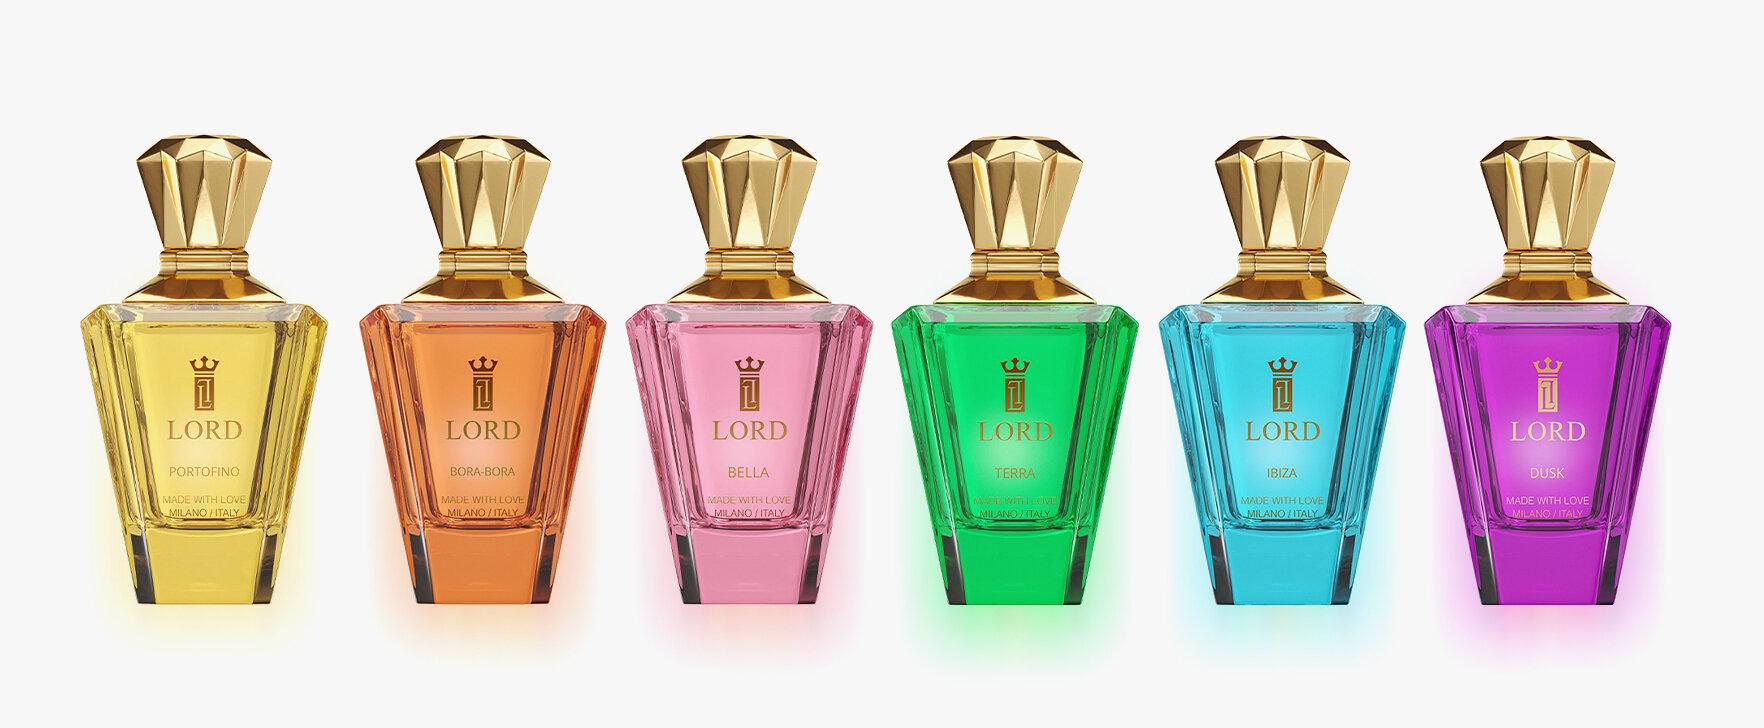 A Fragrant Dream Library: The New “Dream Library” Collection From Lord